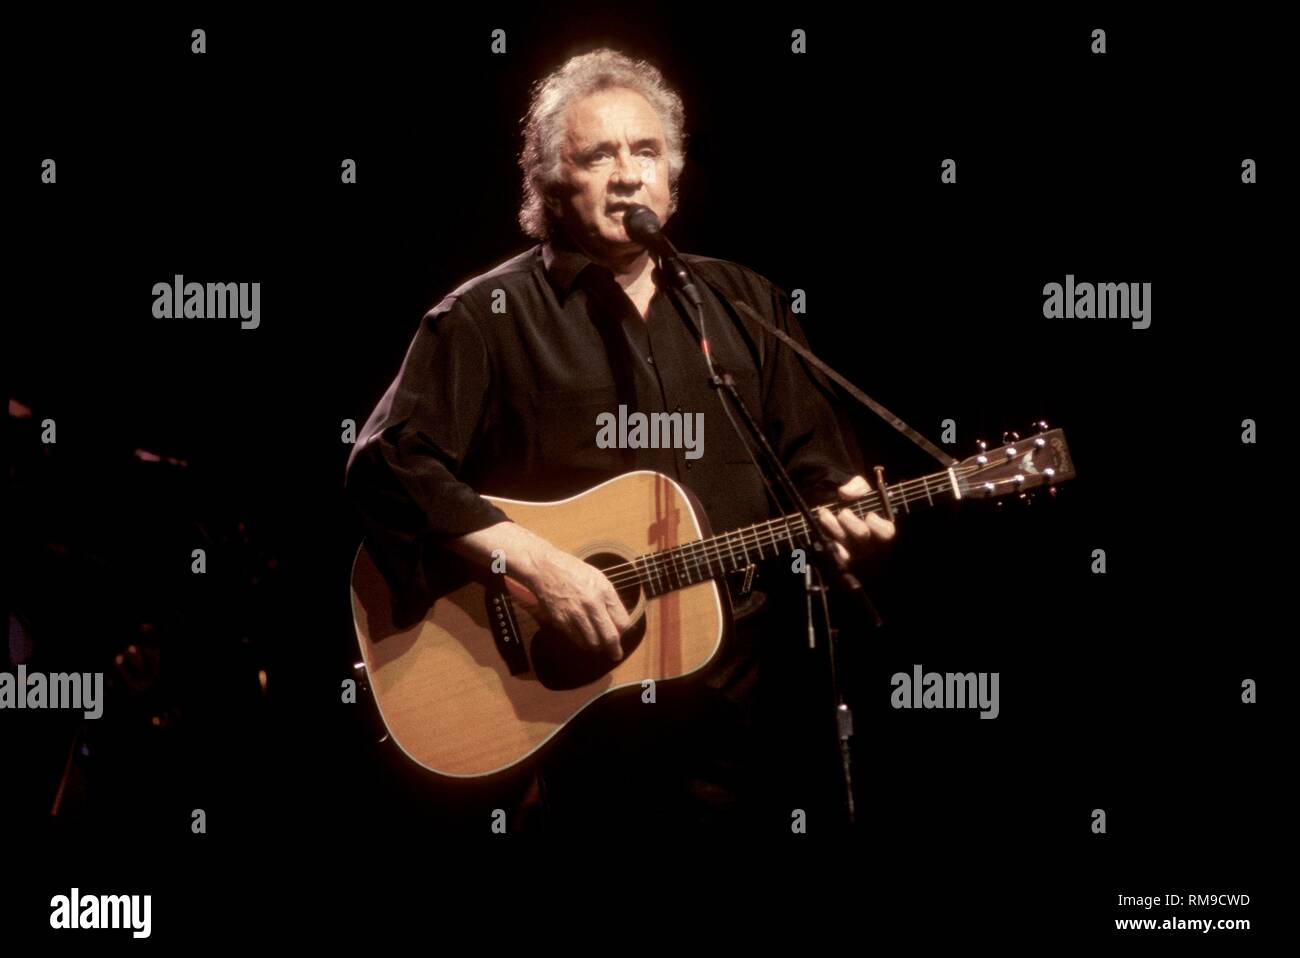 Grammy Award winning singer and songwriter Johnny Cash is shown performing on stage with the country super group the Highwaymen. Stock Photo